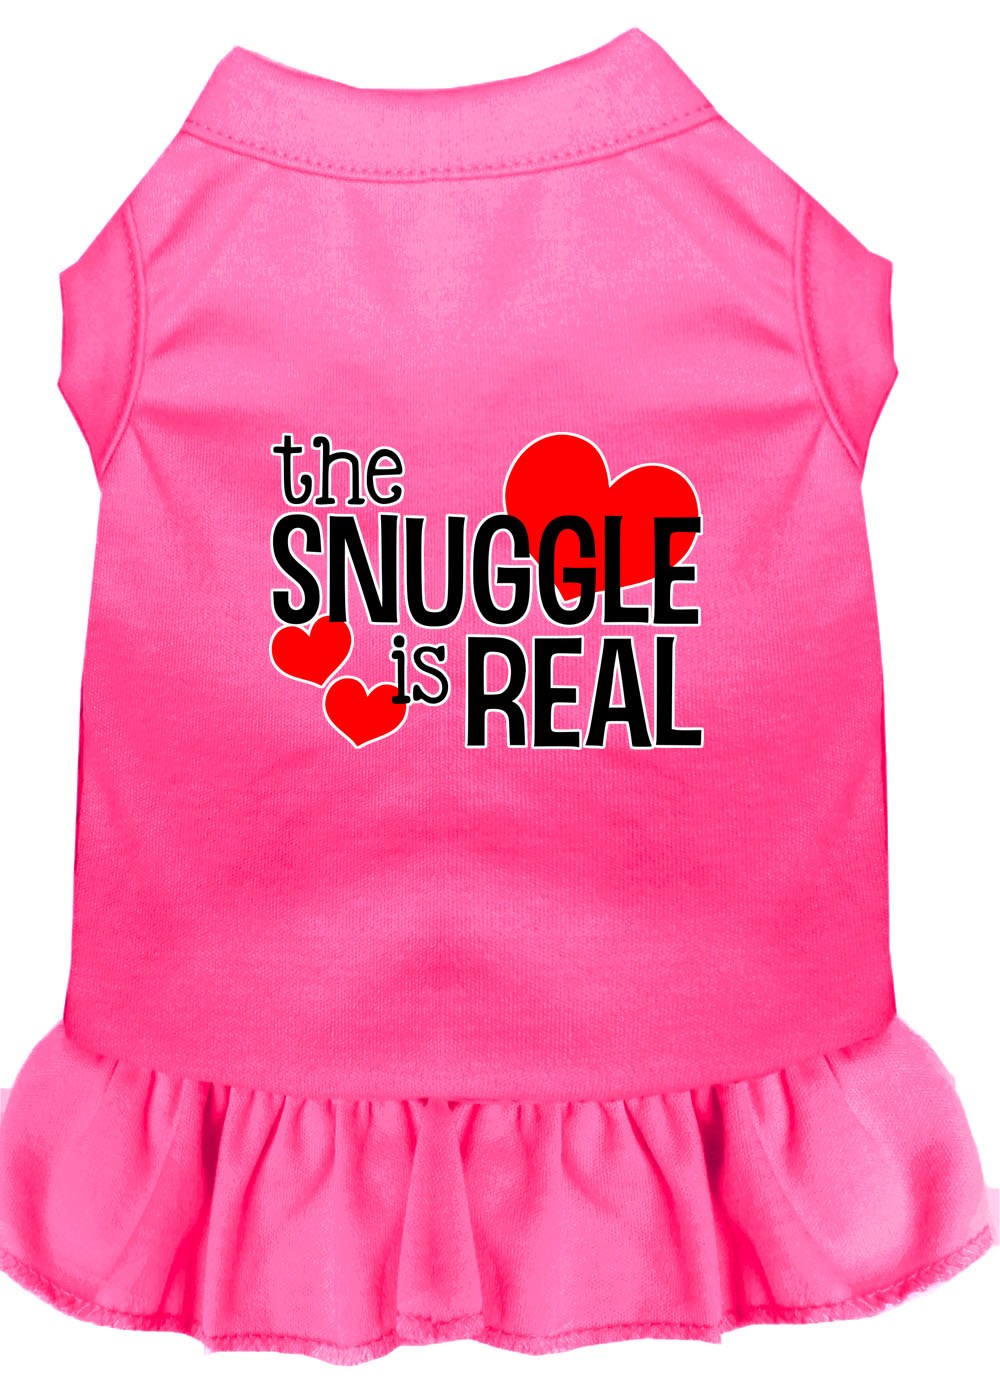 The Snuggle is Real Screen Print Dog Dress Bright Pink Lg